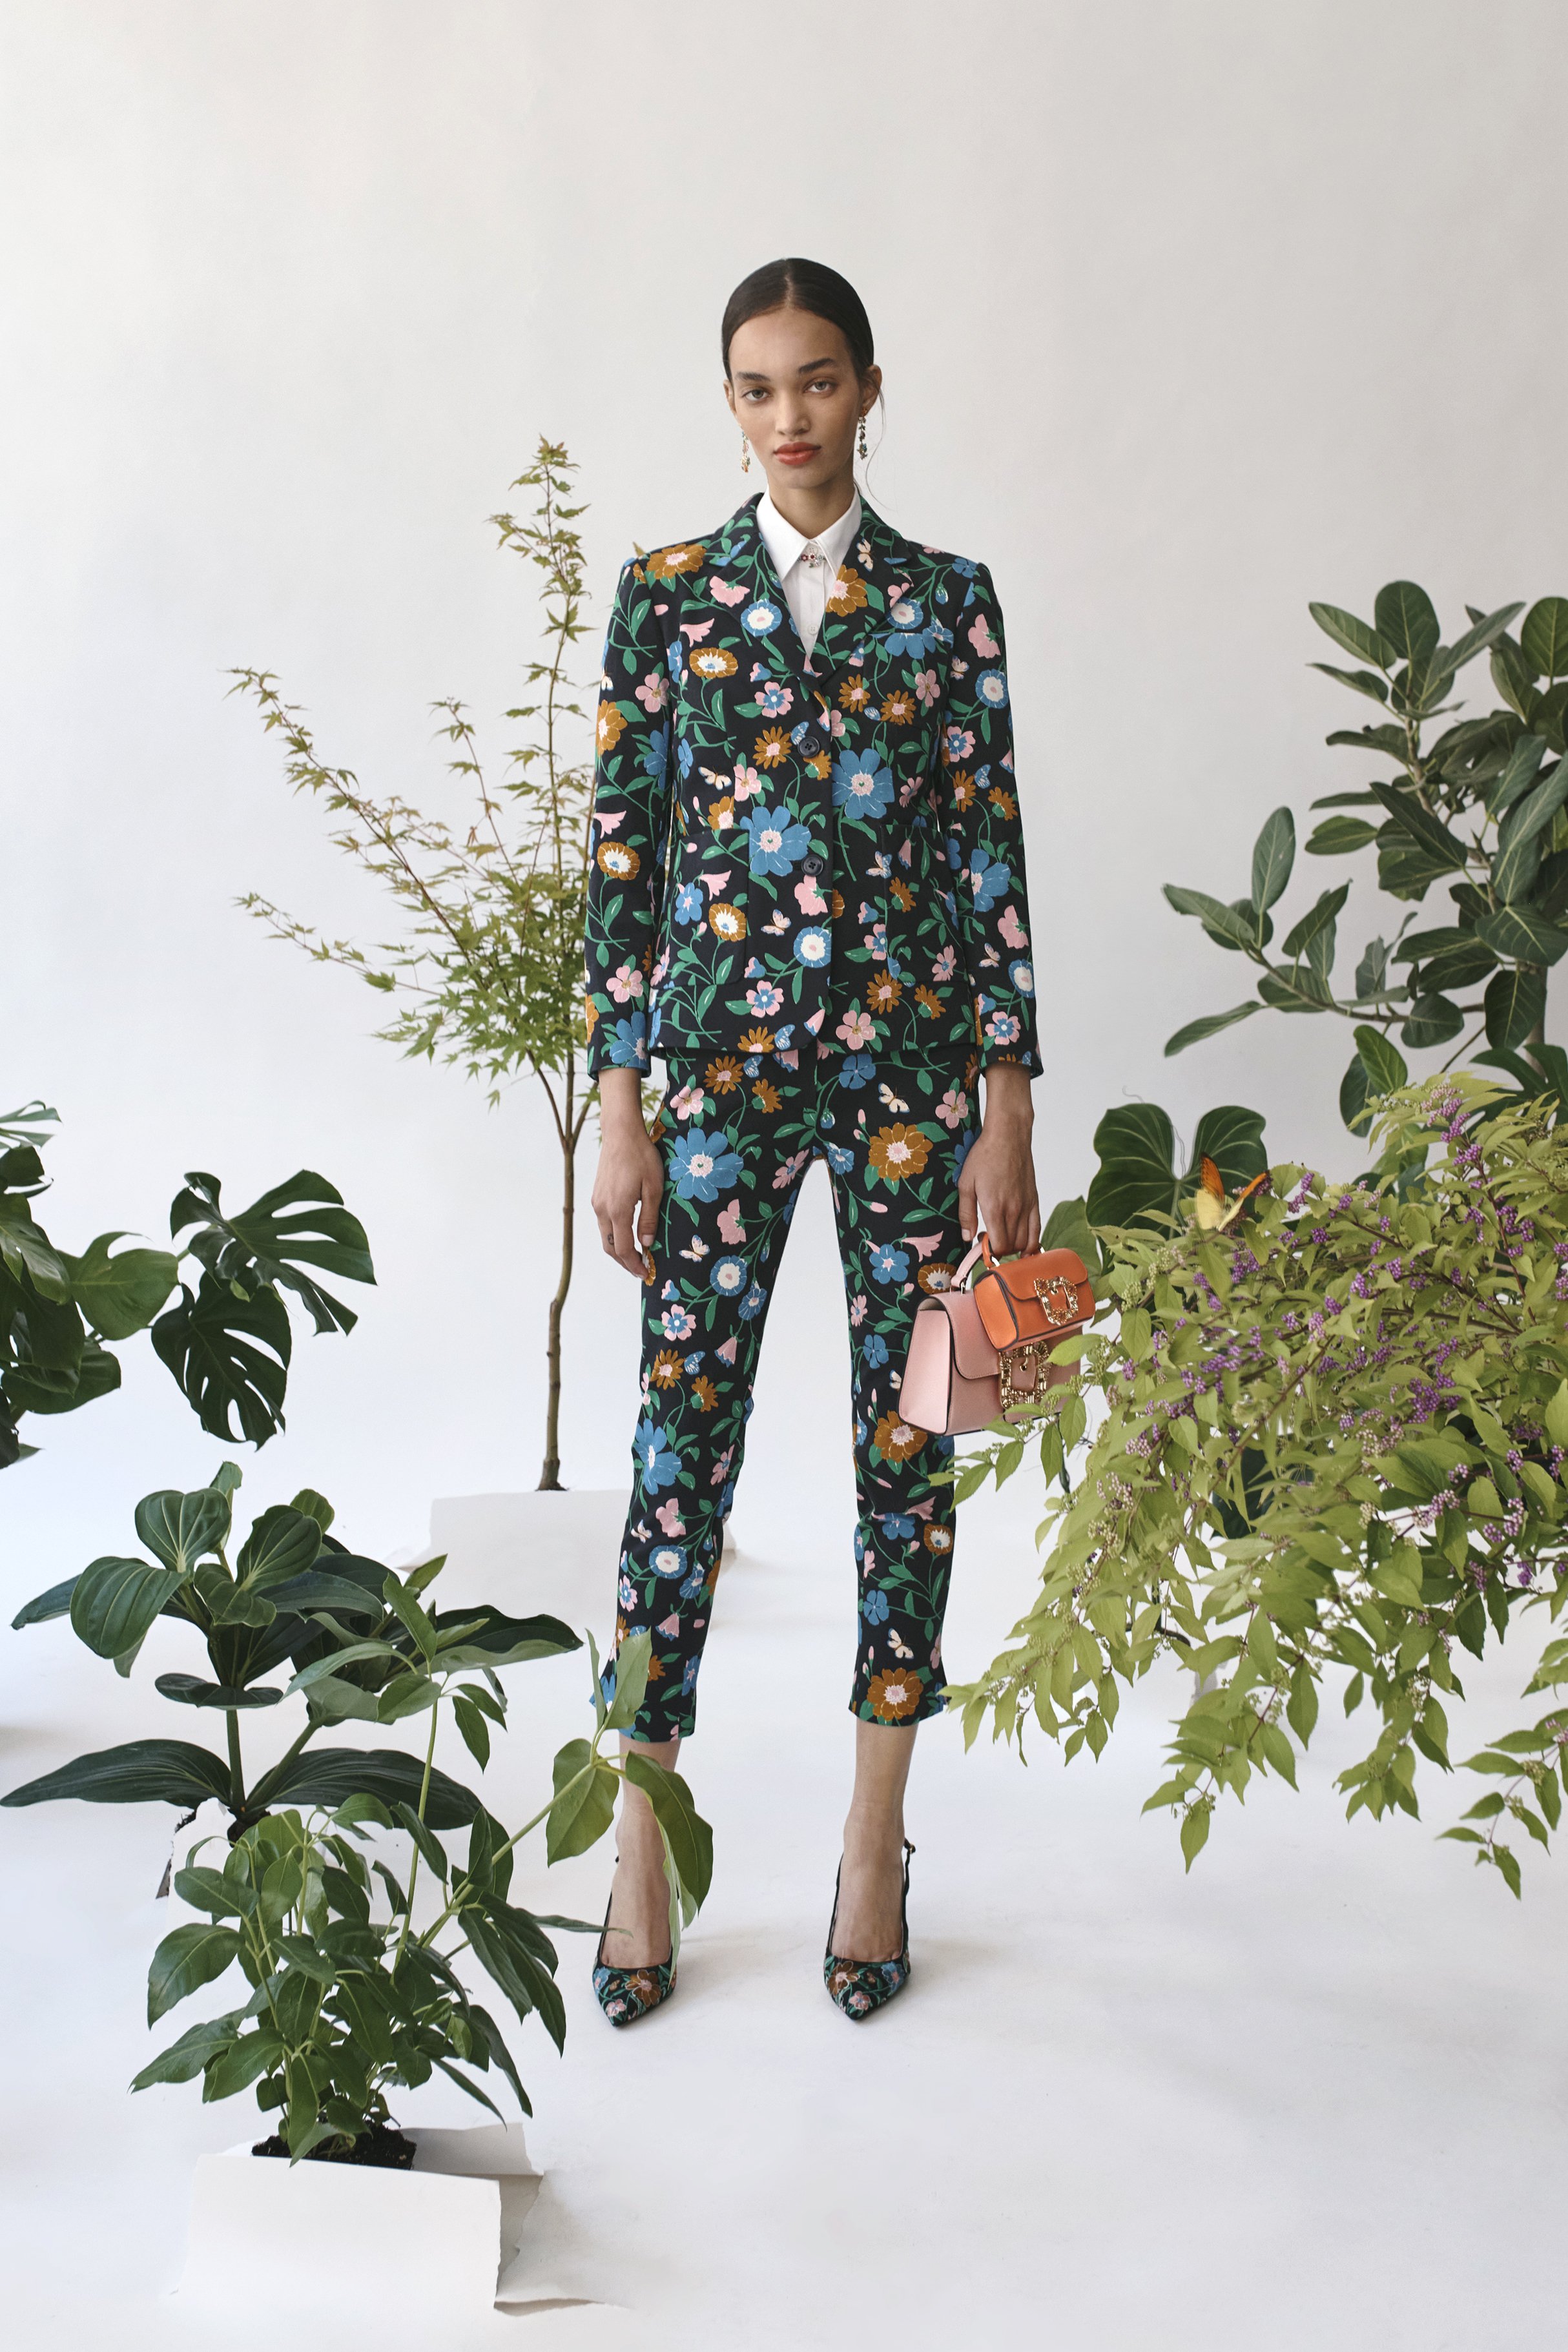 Kate Spade New York Spring 2022 Collection — SSI Life